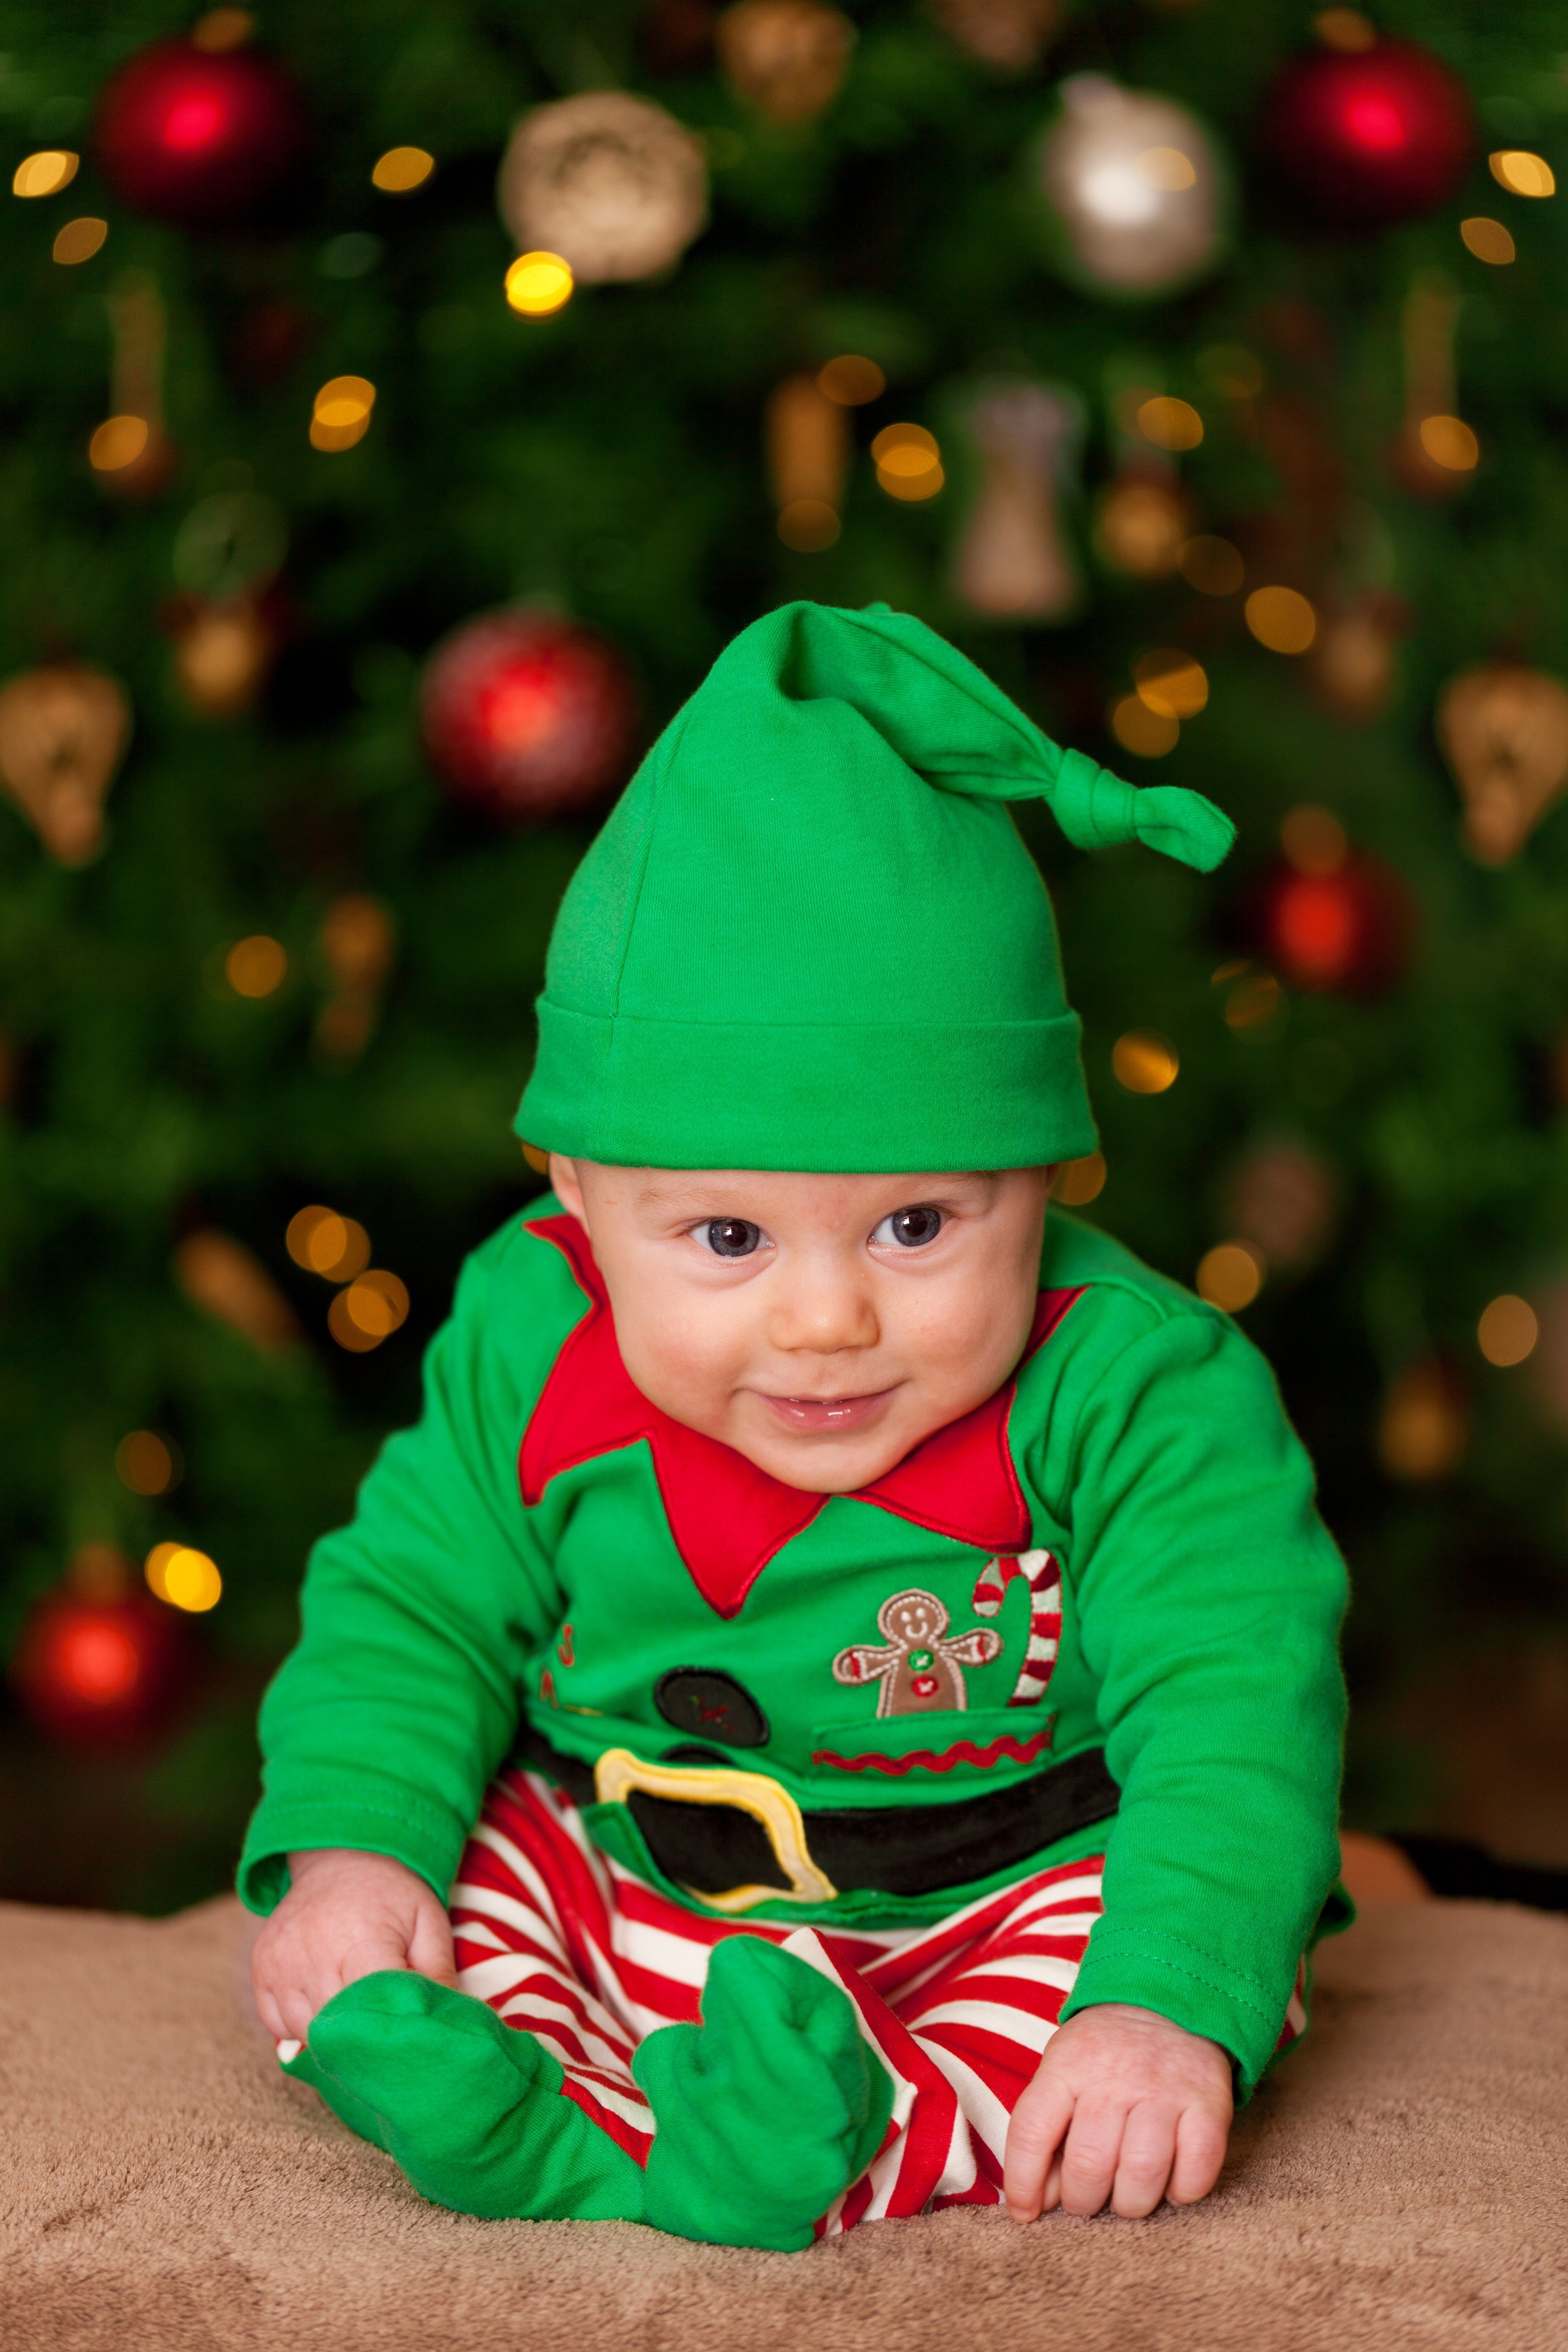 Baby dressed as an elf.